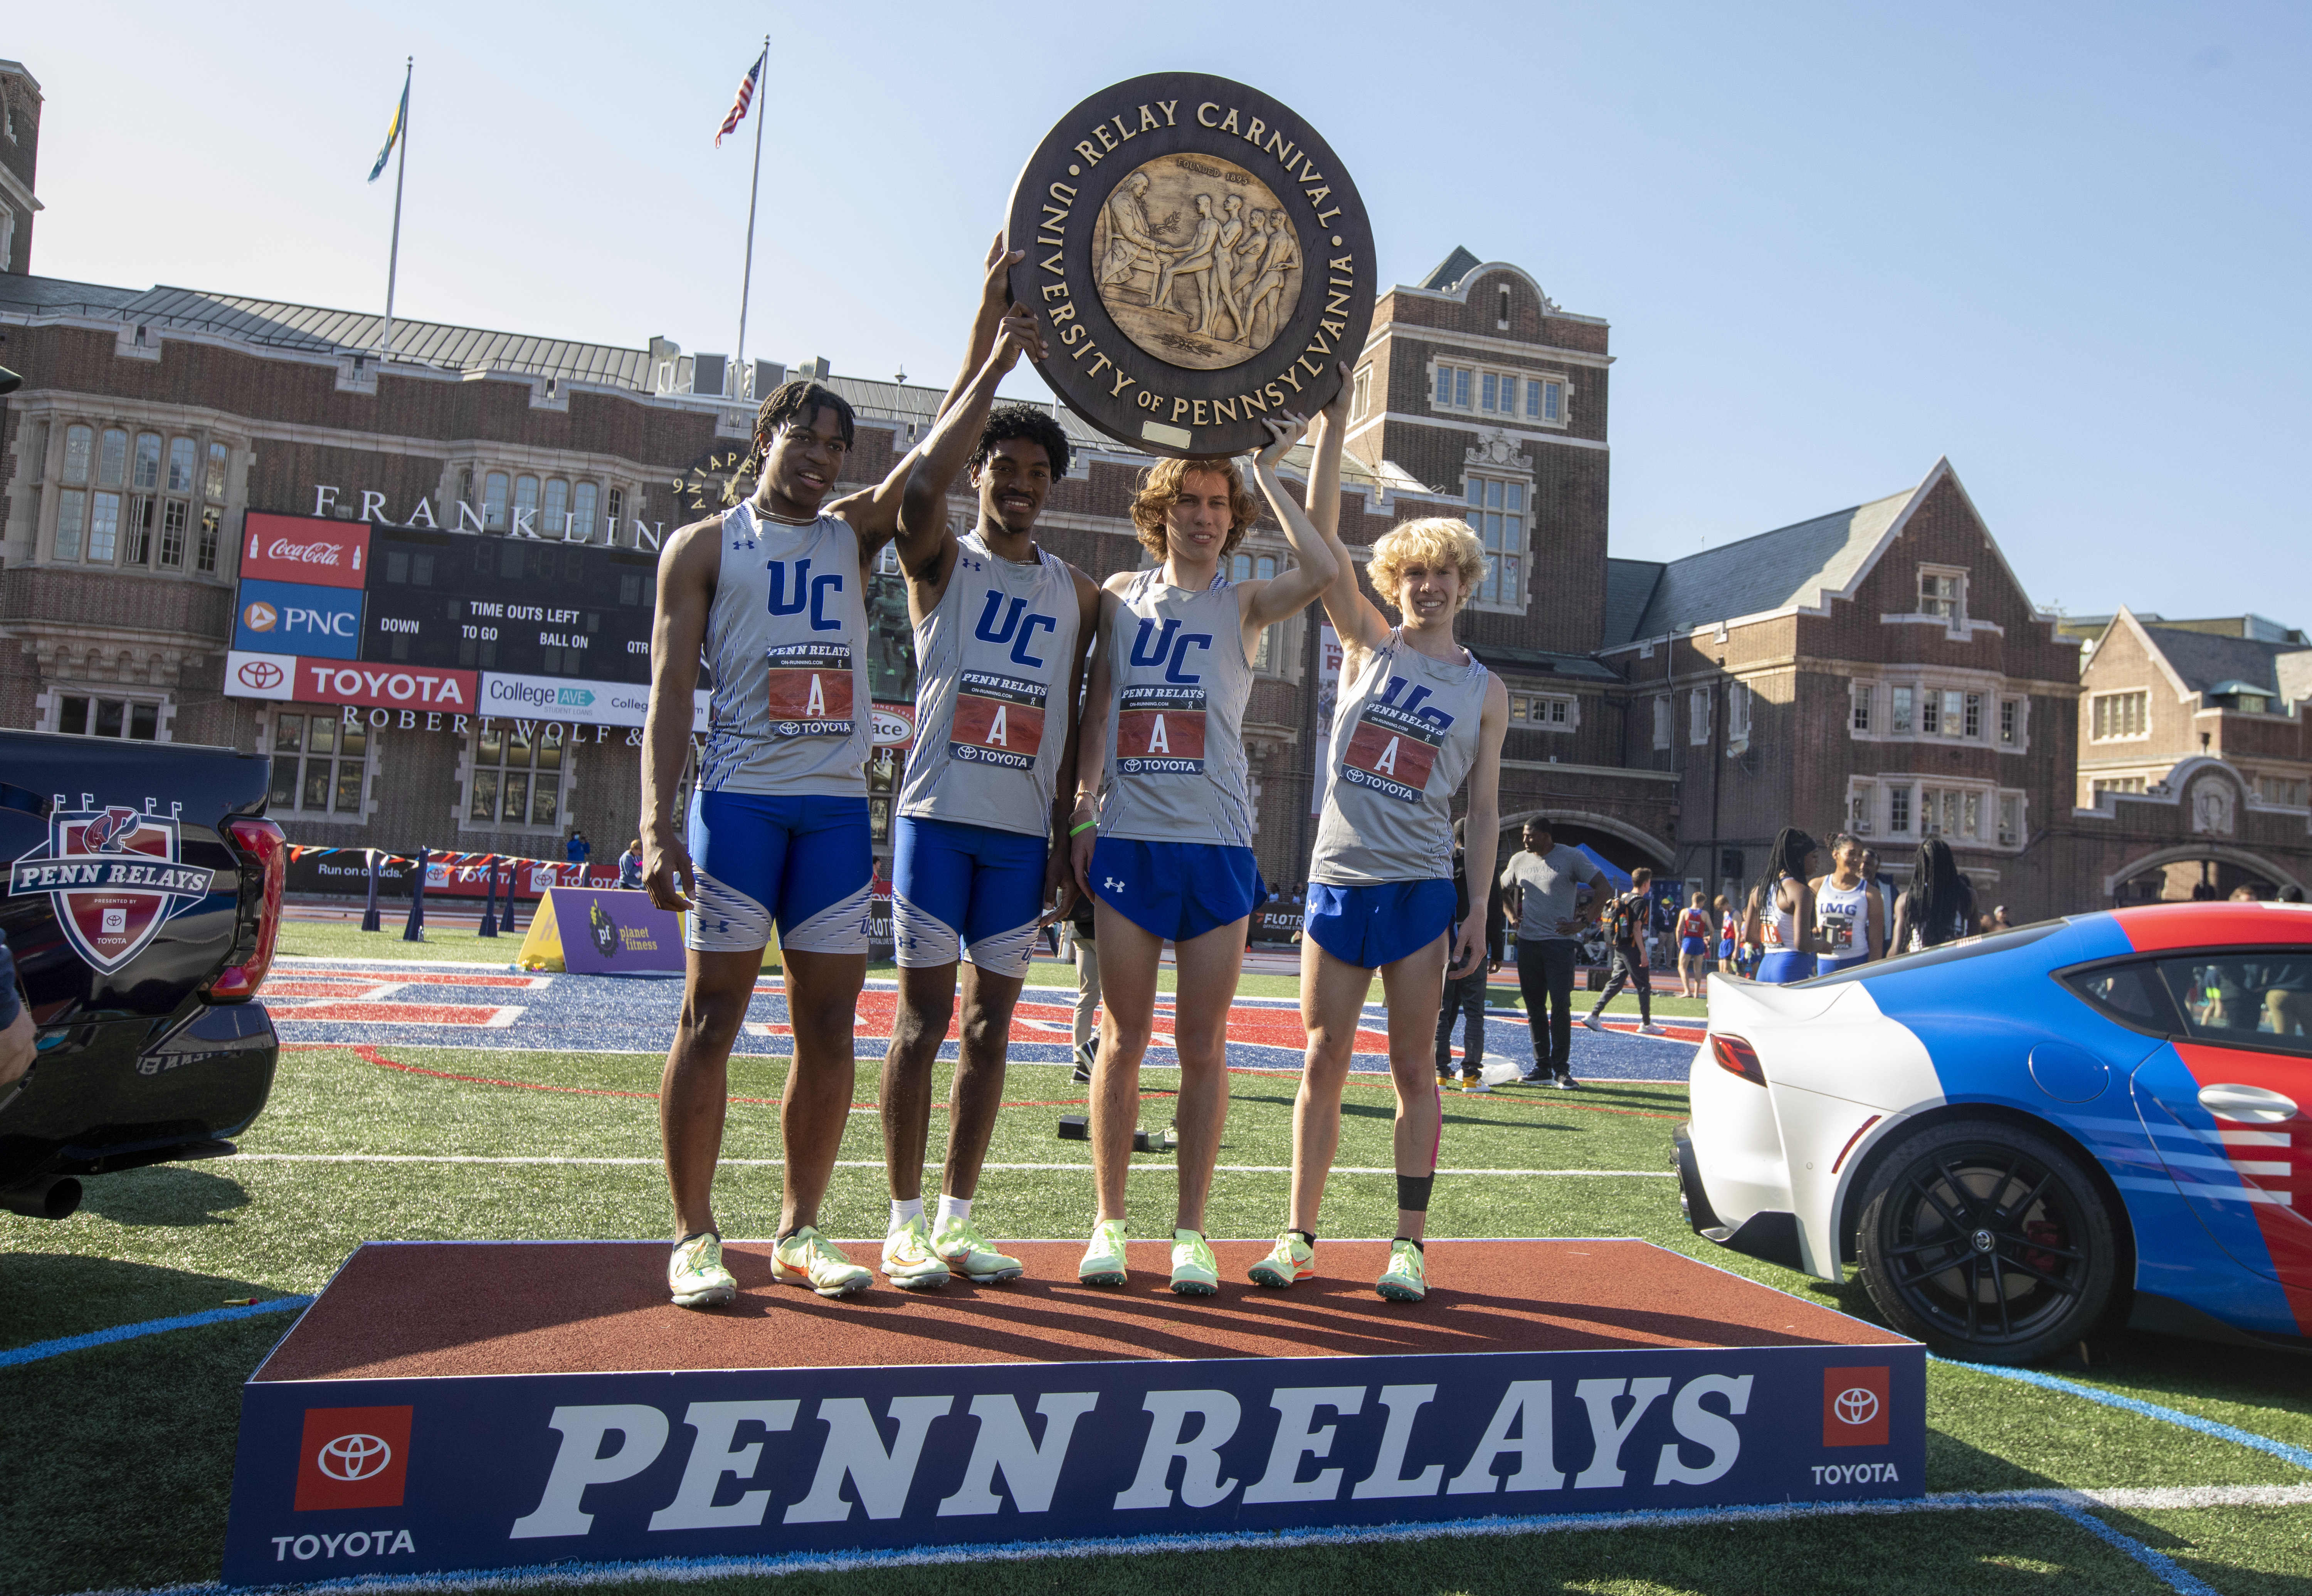 Penn Relays 2022: Multiple teams qualify for championship races in